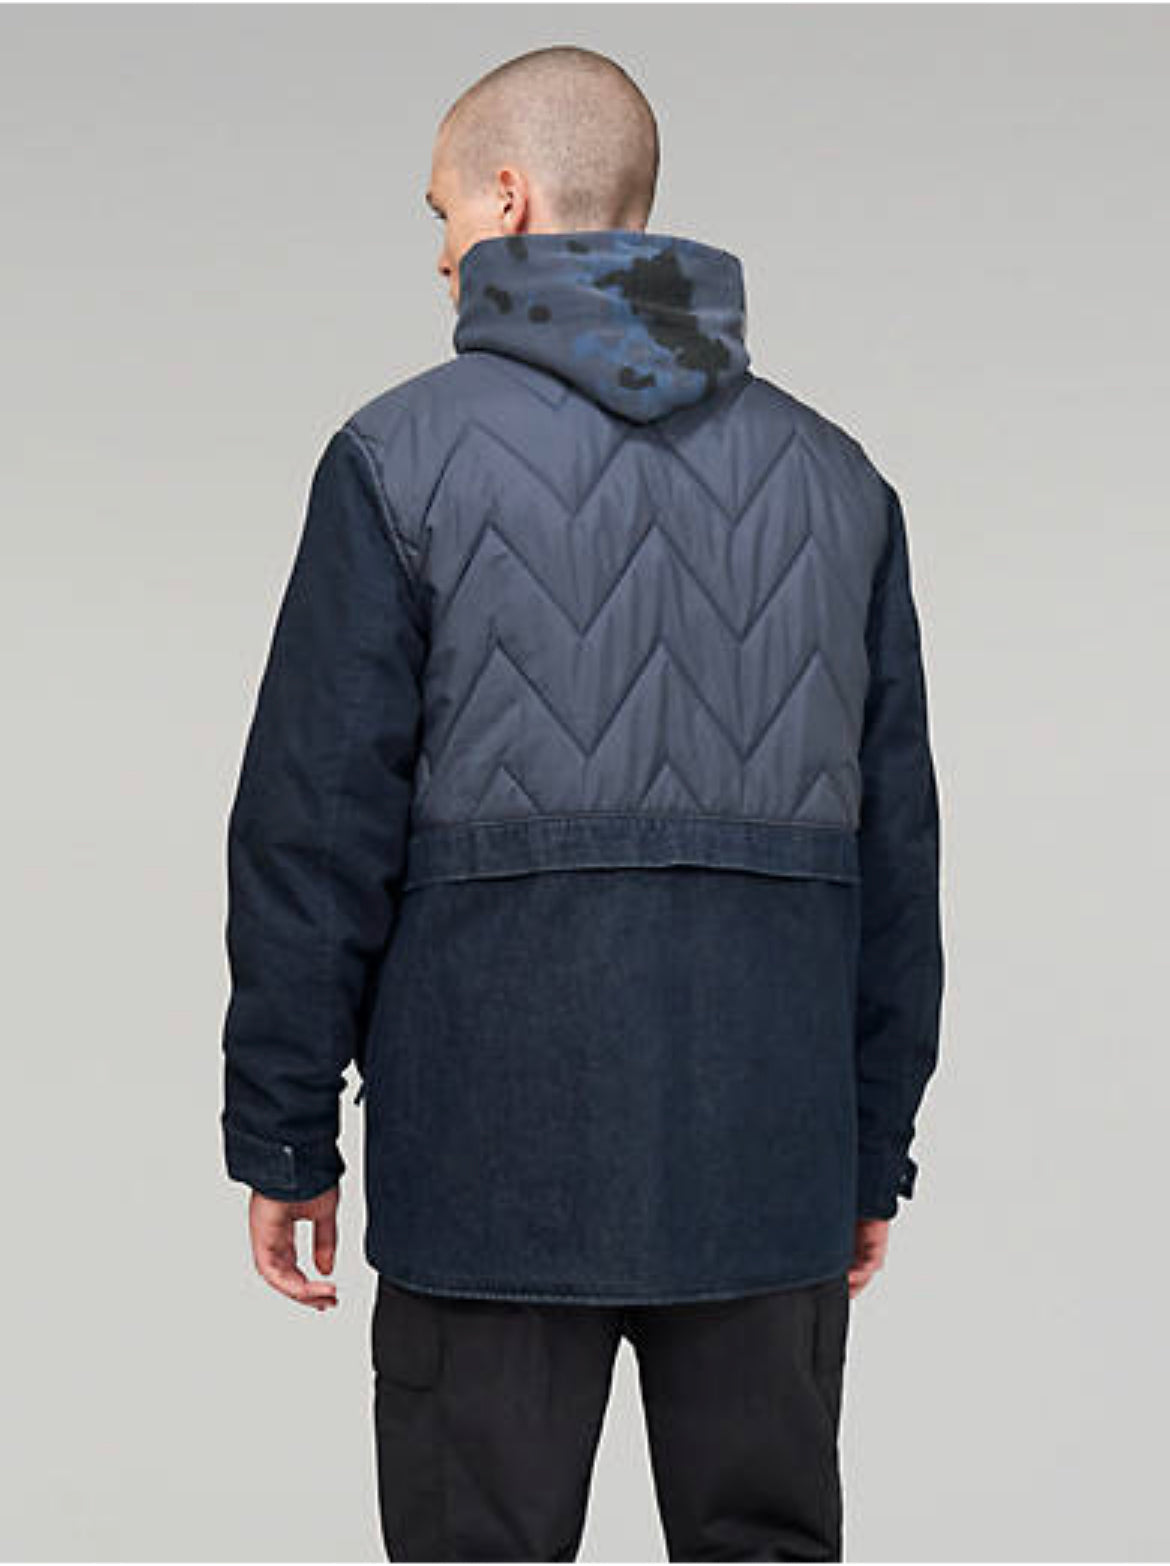 Levi’s Made & Crafted Mountain Coat